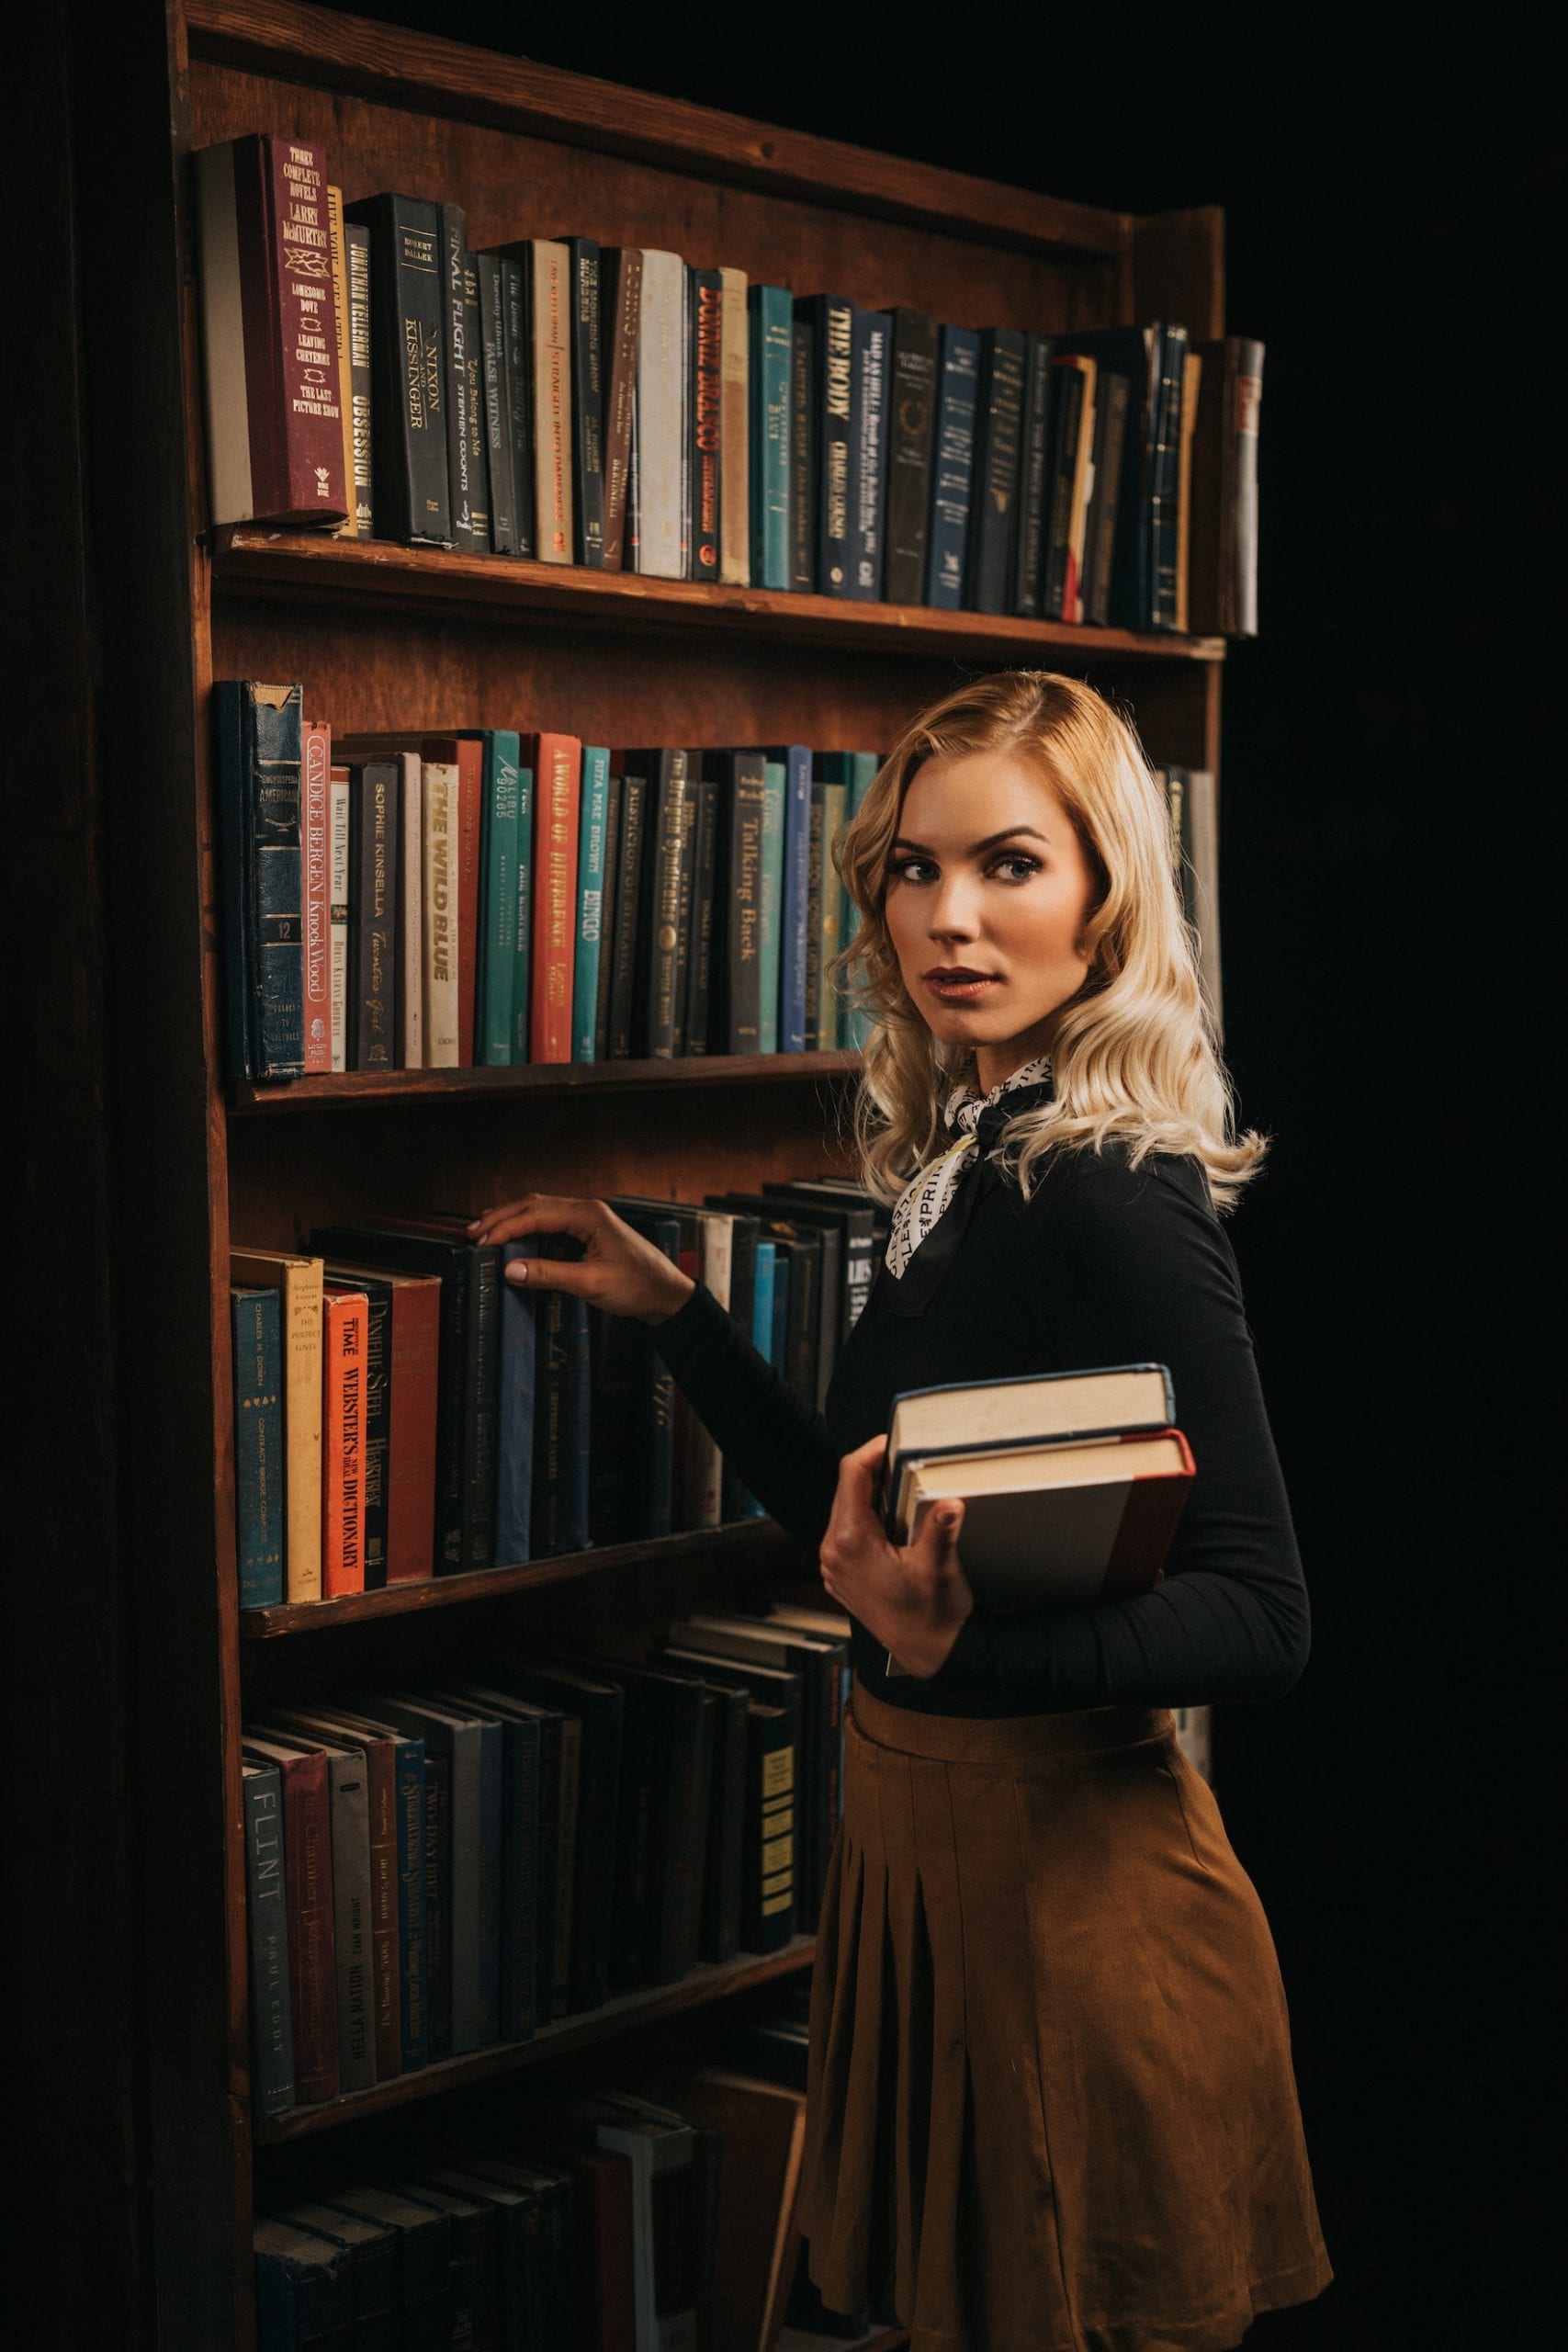 Professional Photography Services by C&I Studios Woman with long blond hair posing by a bookcase with books and holding two books in her arm